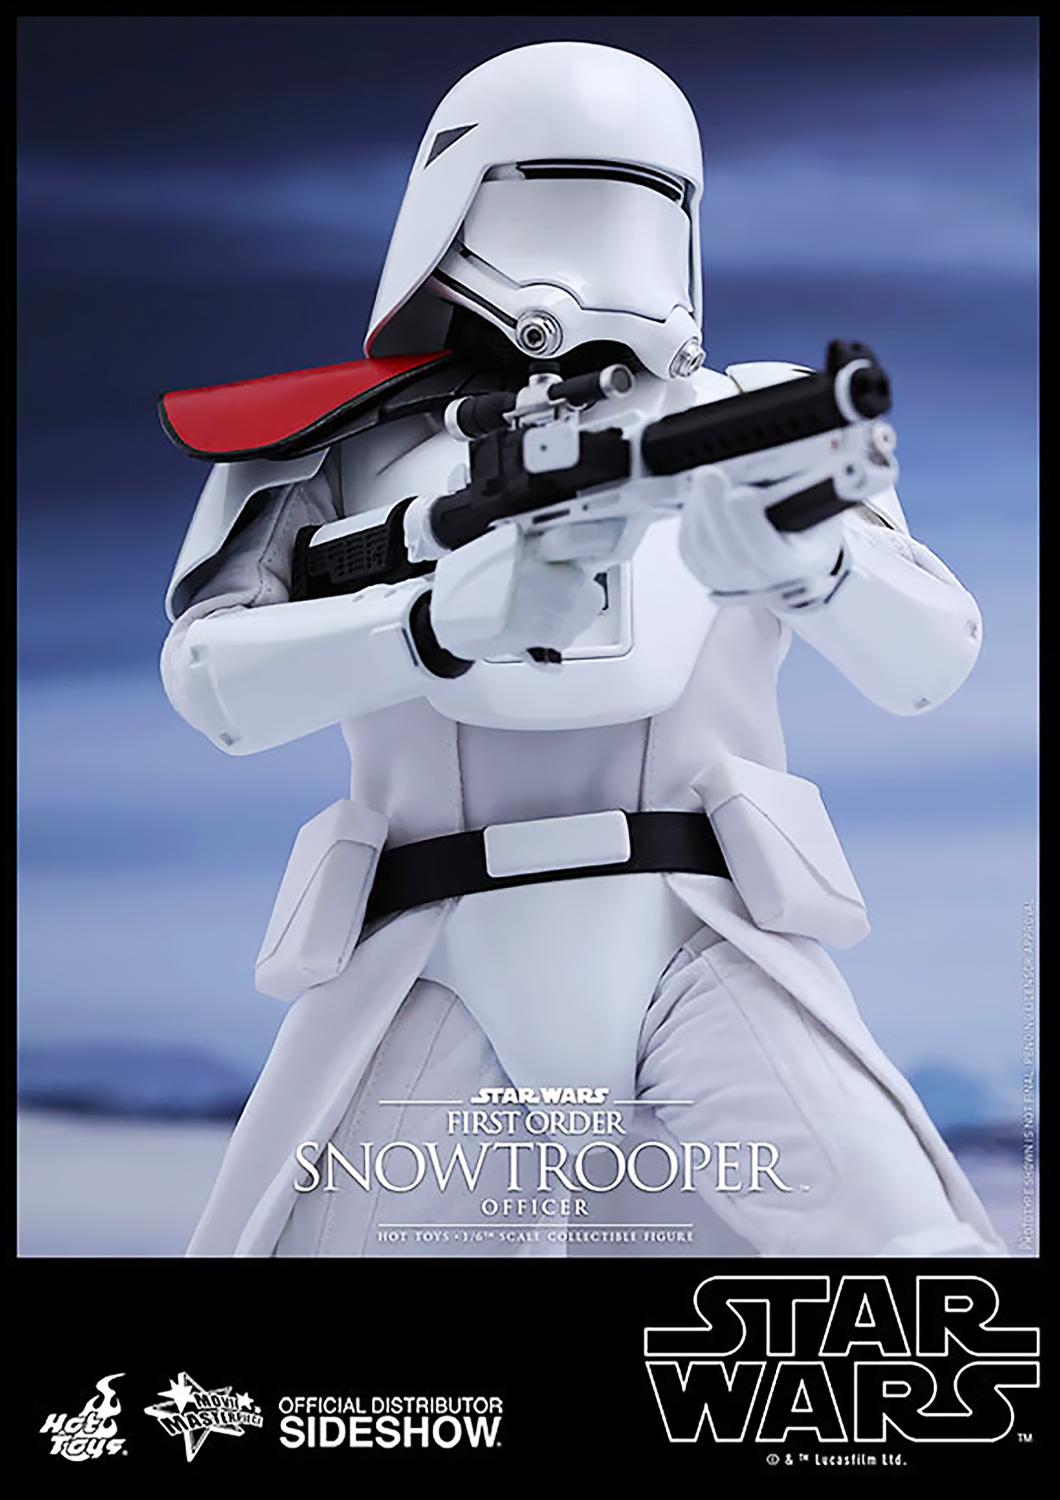 HOT TOYS STAR WARS EPISODE VII THE FORCE AWAKENS SNOWTROOPERS SET 1/6 SCALE - MMS323 - Anotoys Collectibles